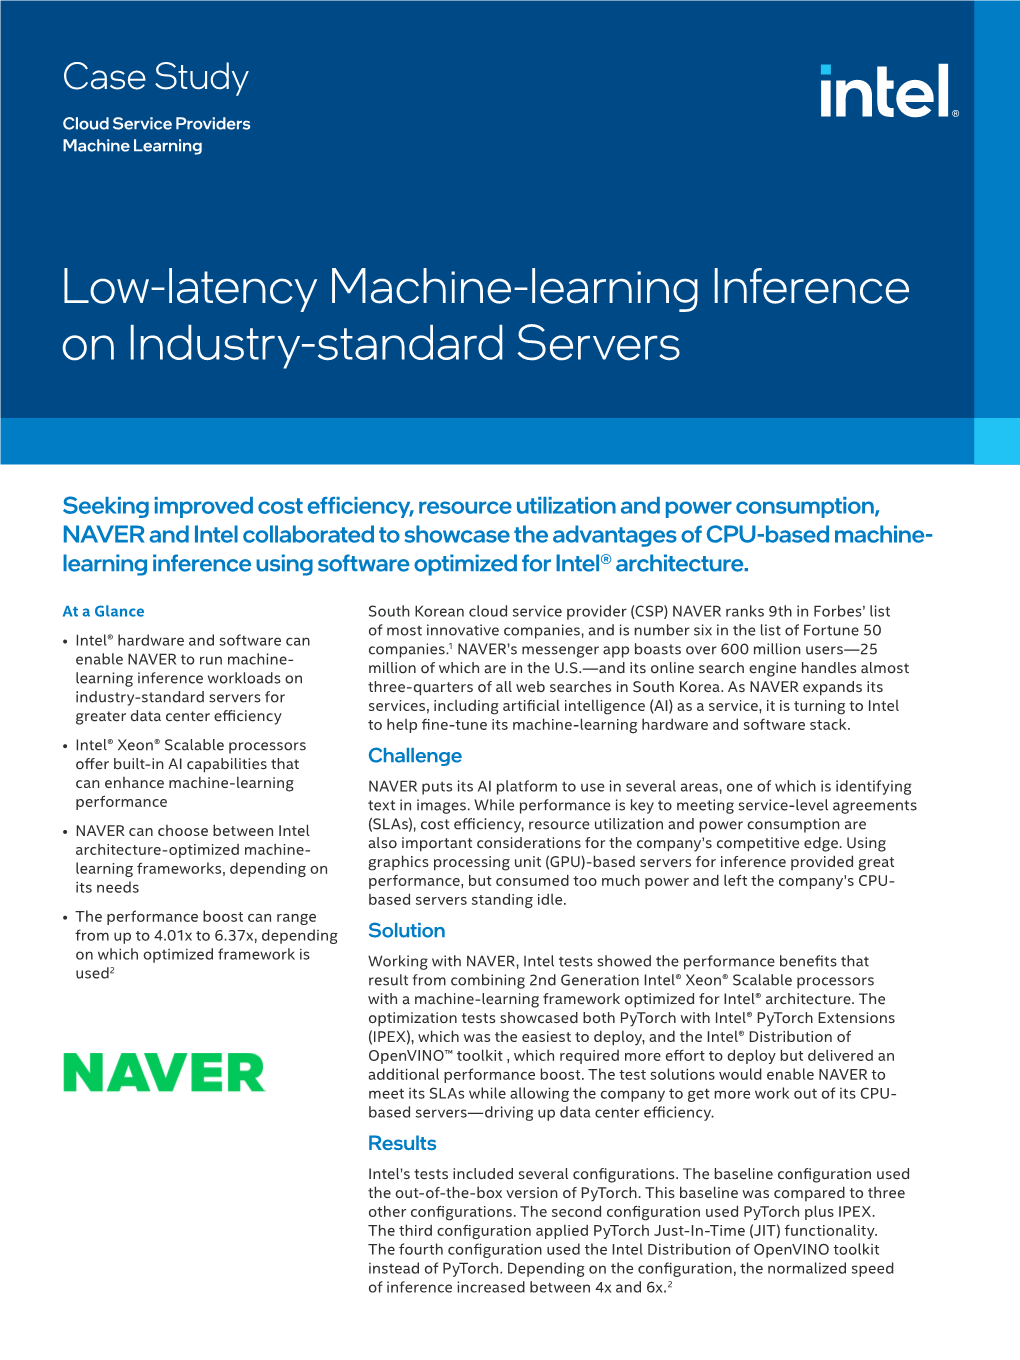 Low-Latency Machine-Learning Inference on Industry-Standard Servers